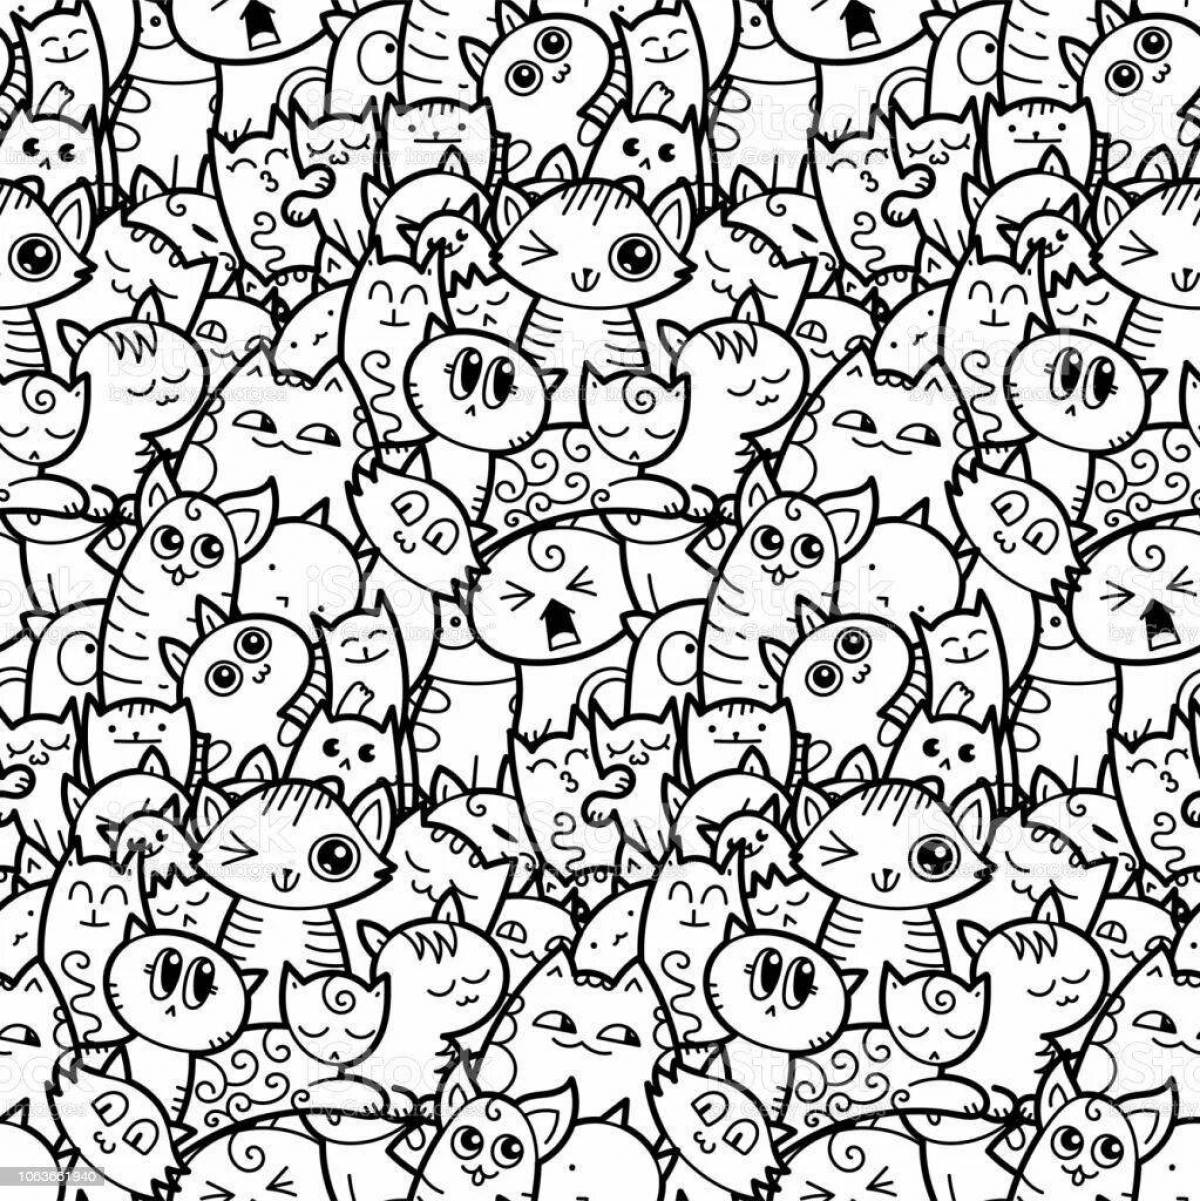 A magical array of cats on one page